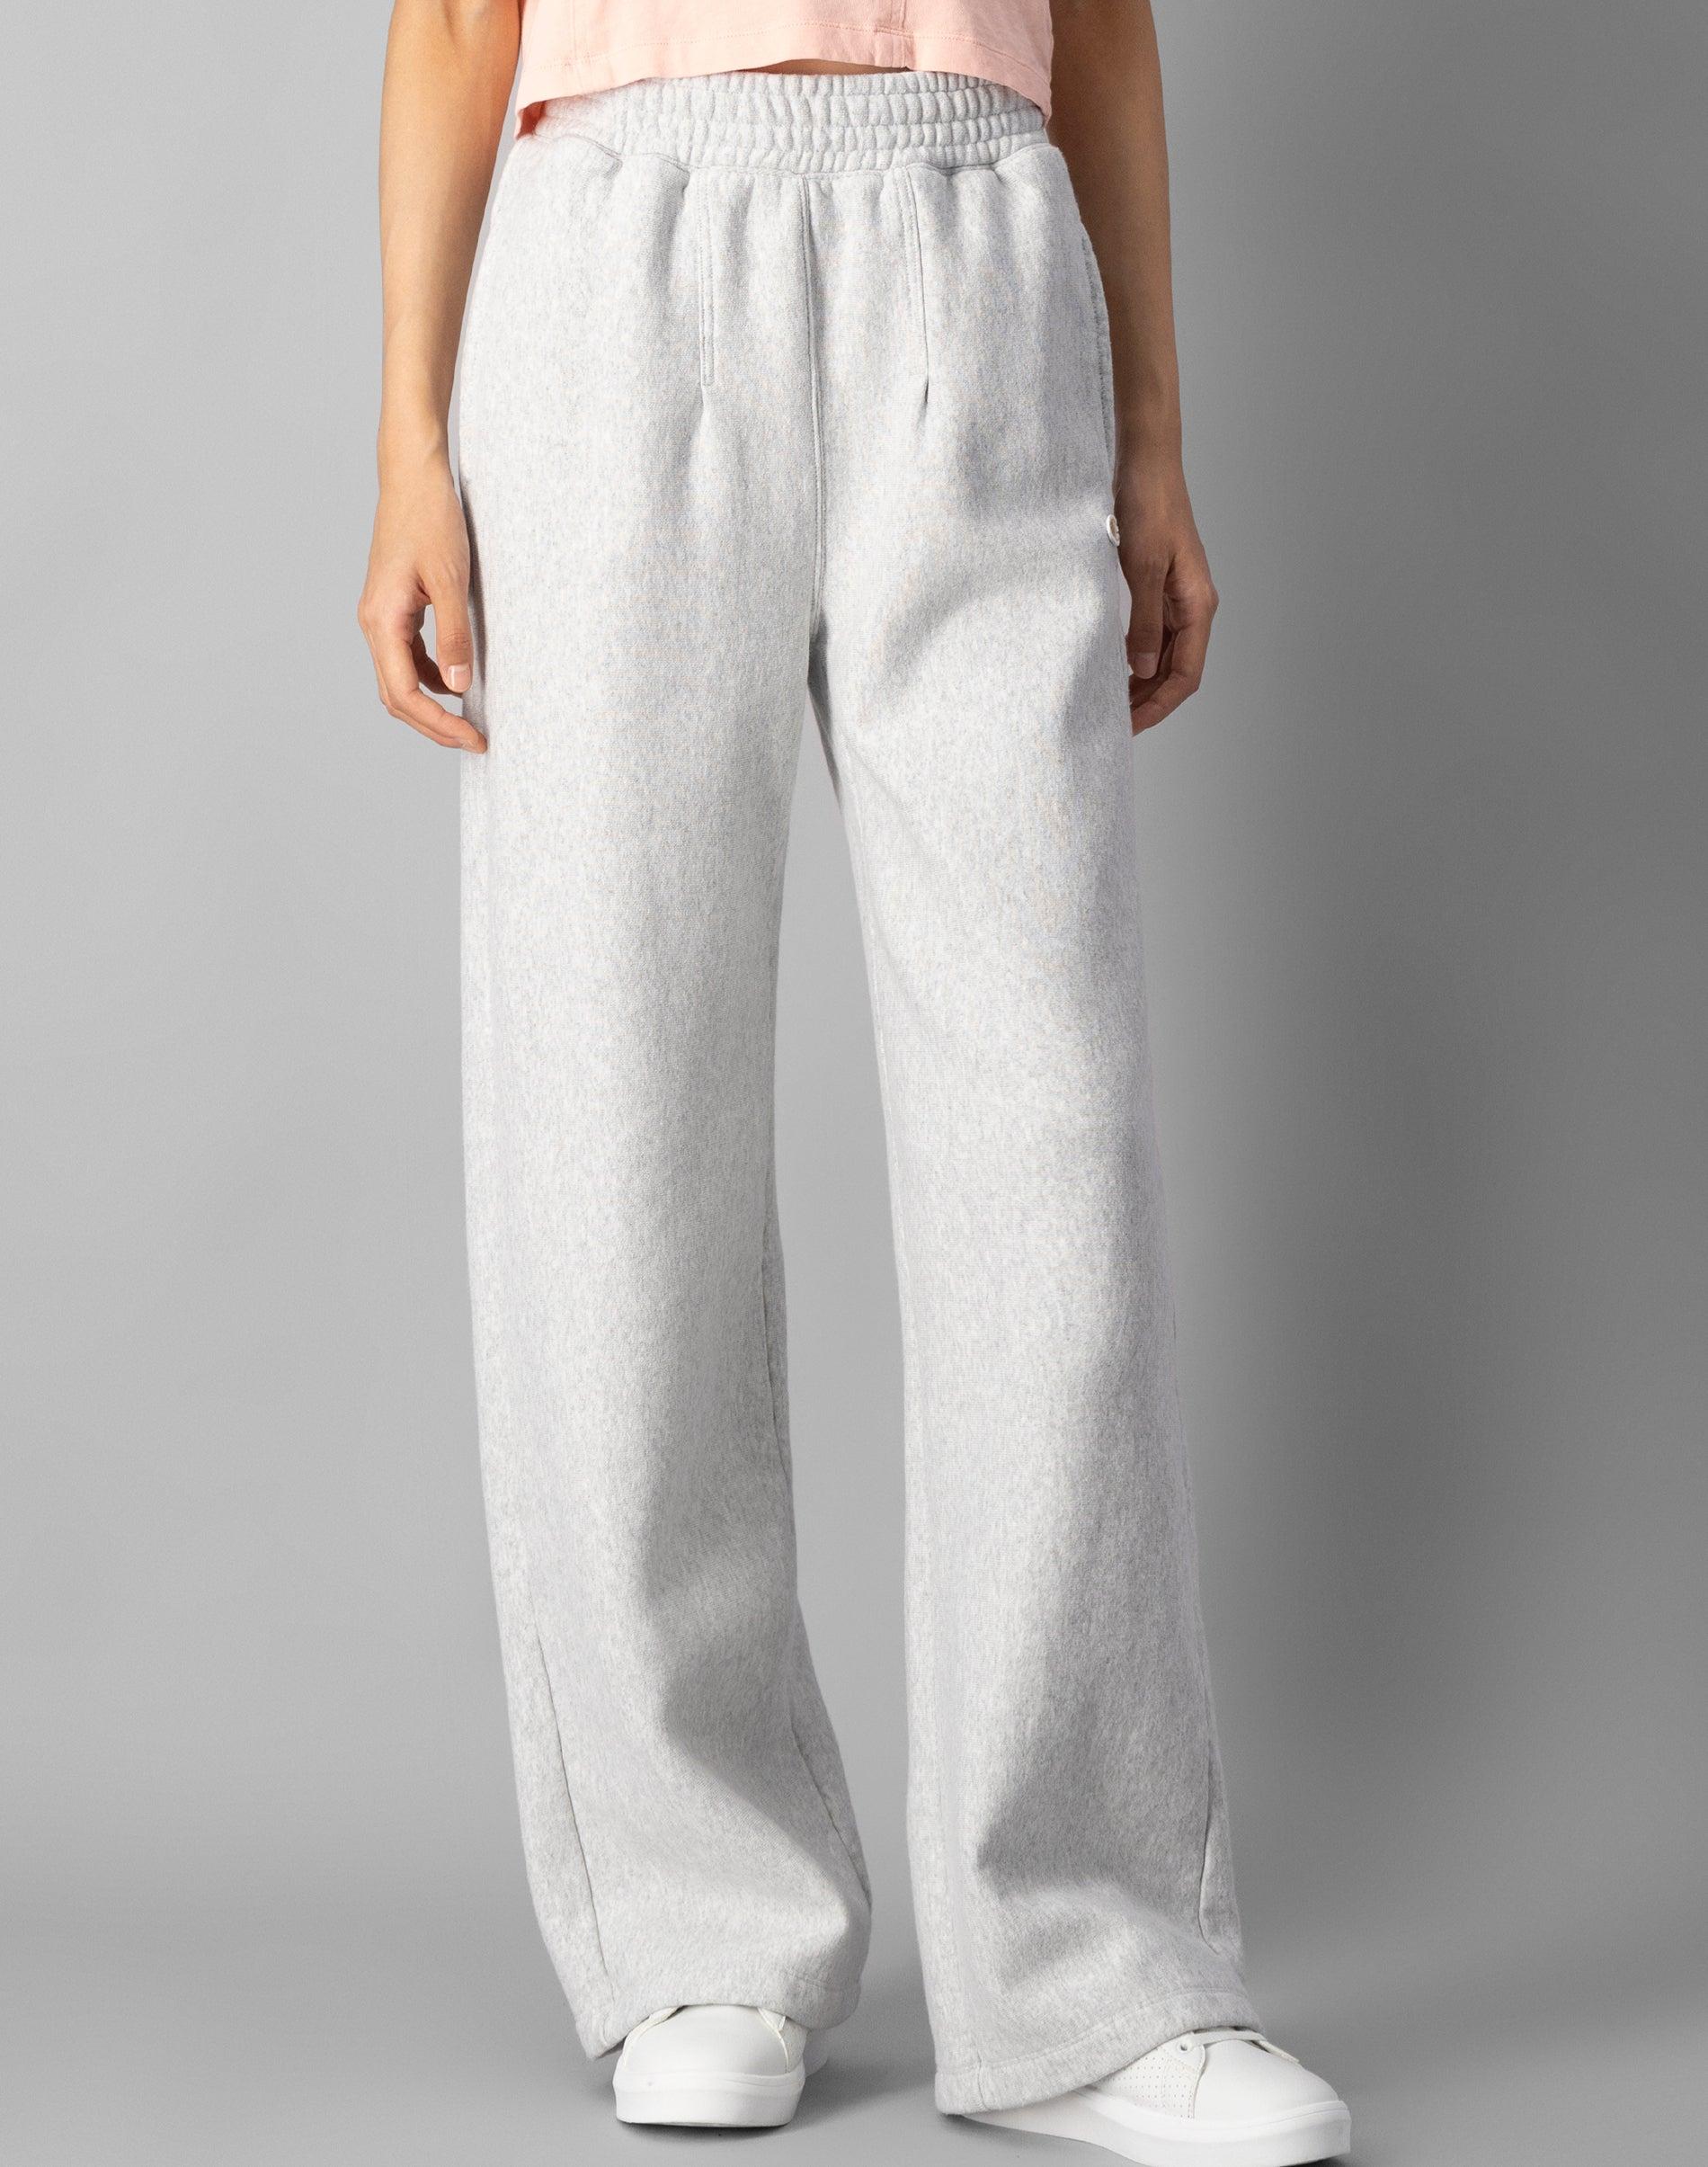 Reverse Weave Tailored High-waist Sweatpants in Gray | Lyst